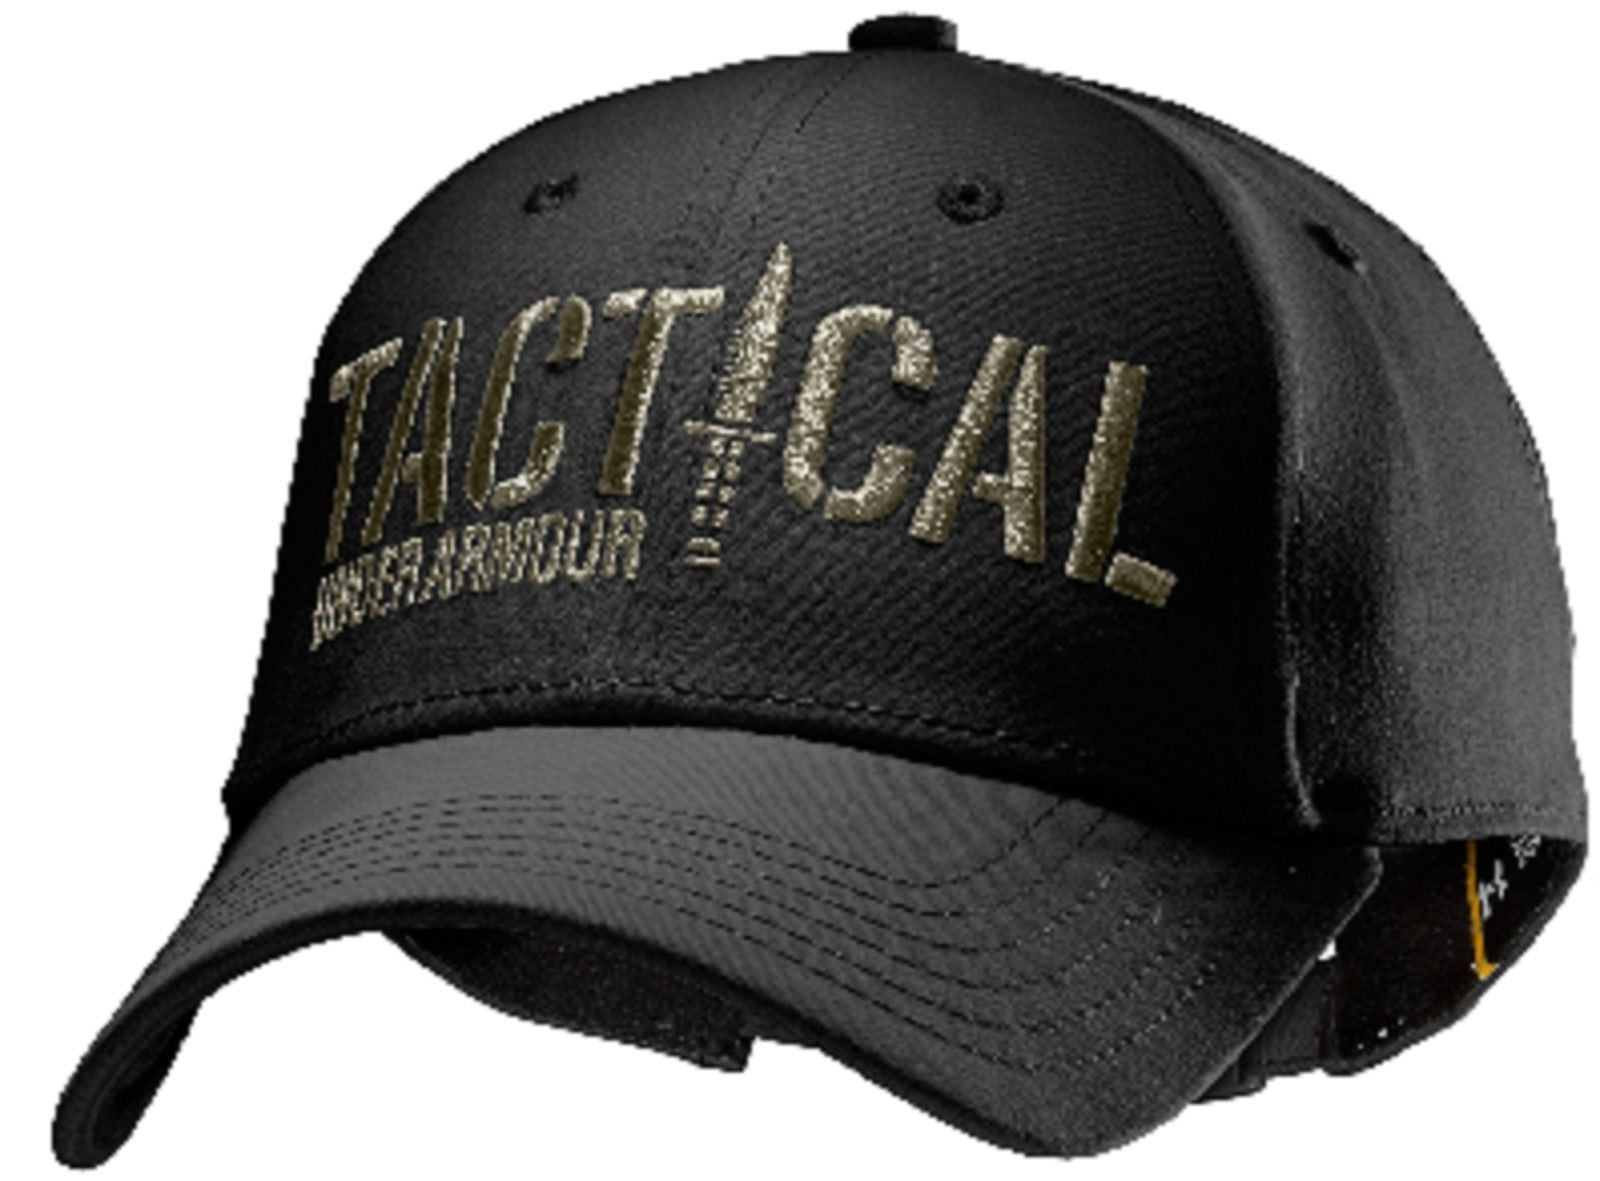 under armor tactical hat